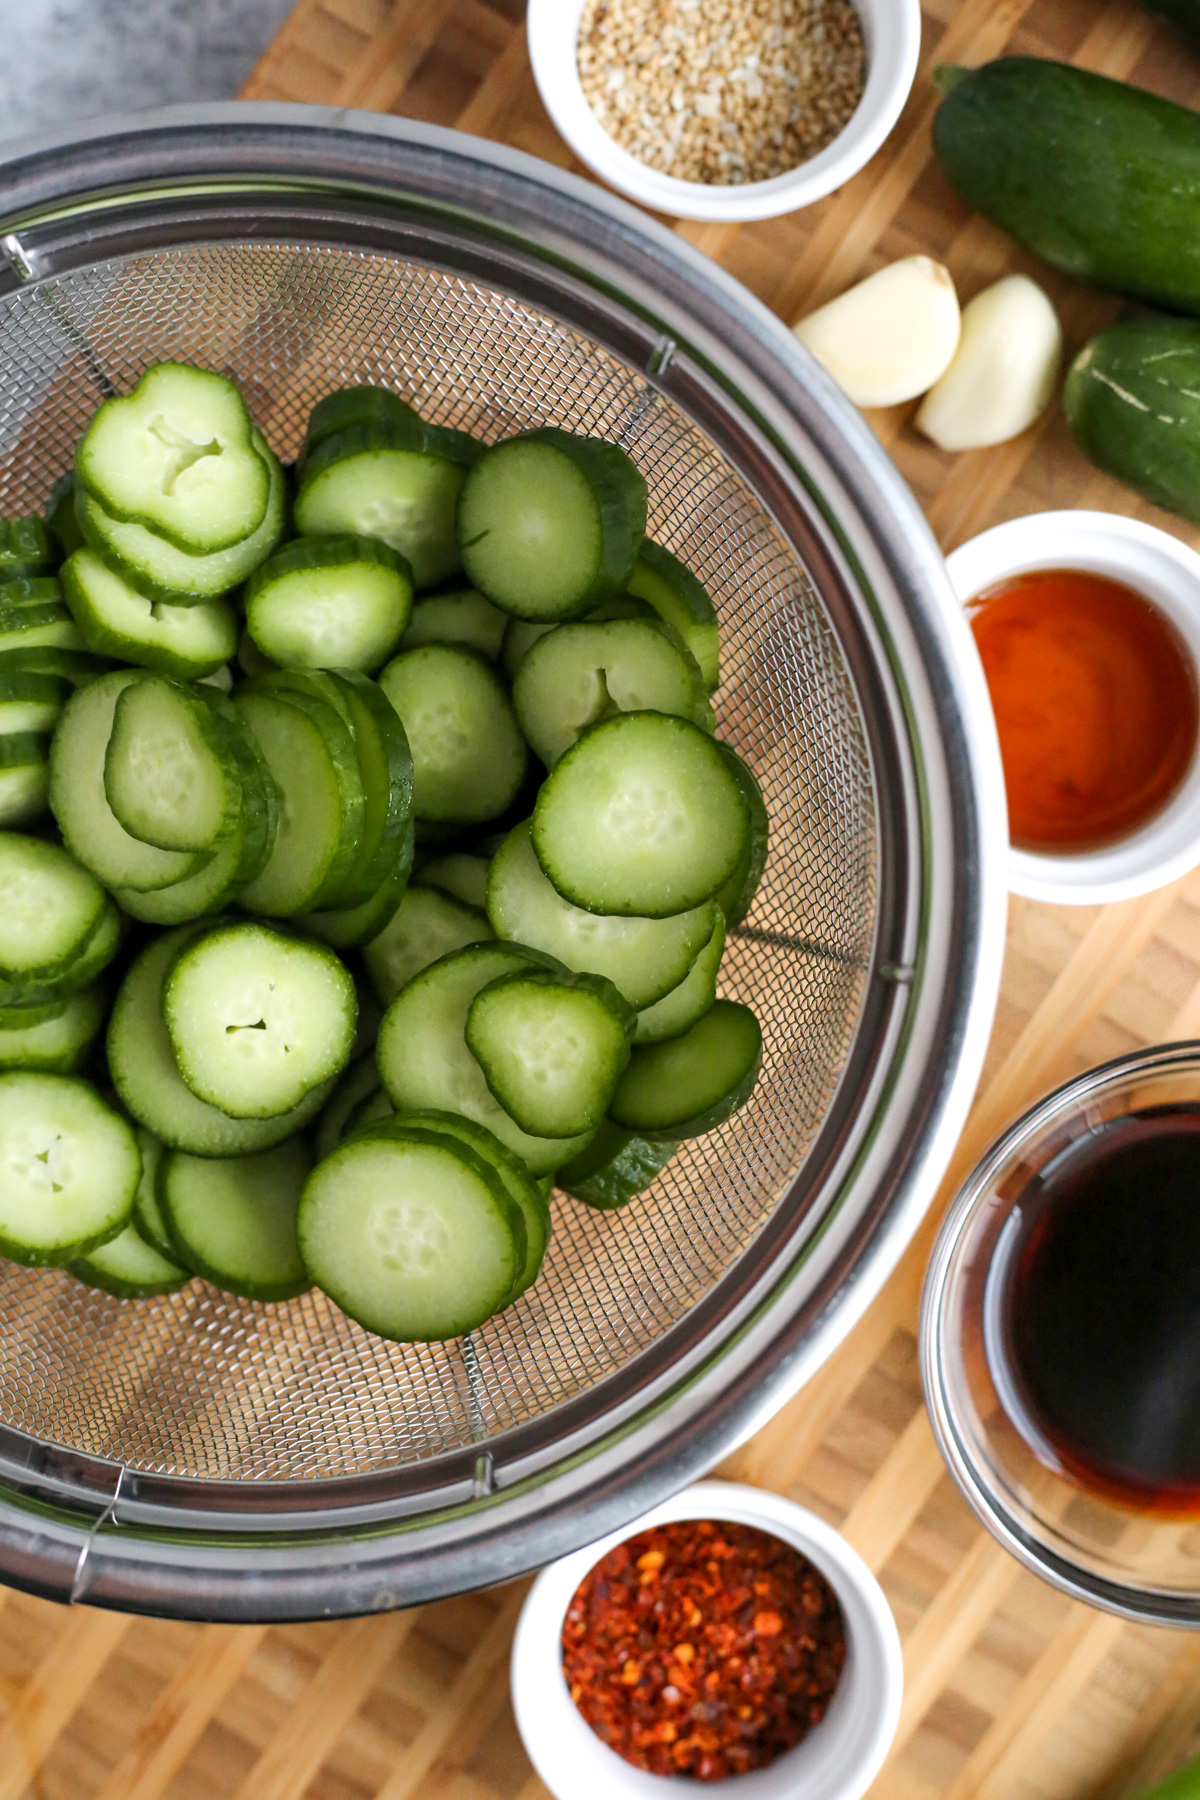 Overhead view of a stainless steel colander filled with thinly sliced cucumber and the prepared ingredients to make oi muchim, or spicy korean cucumber side